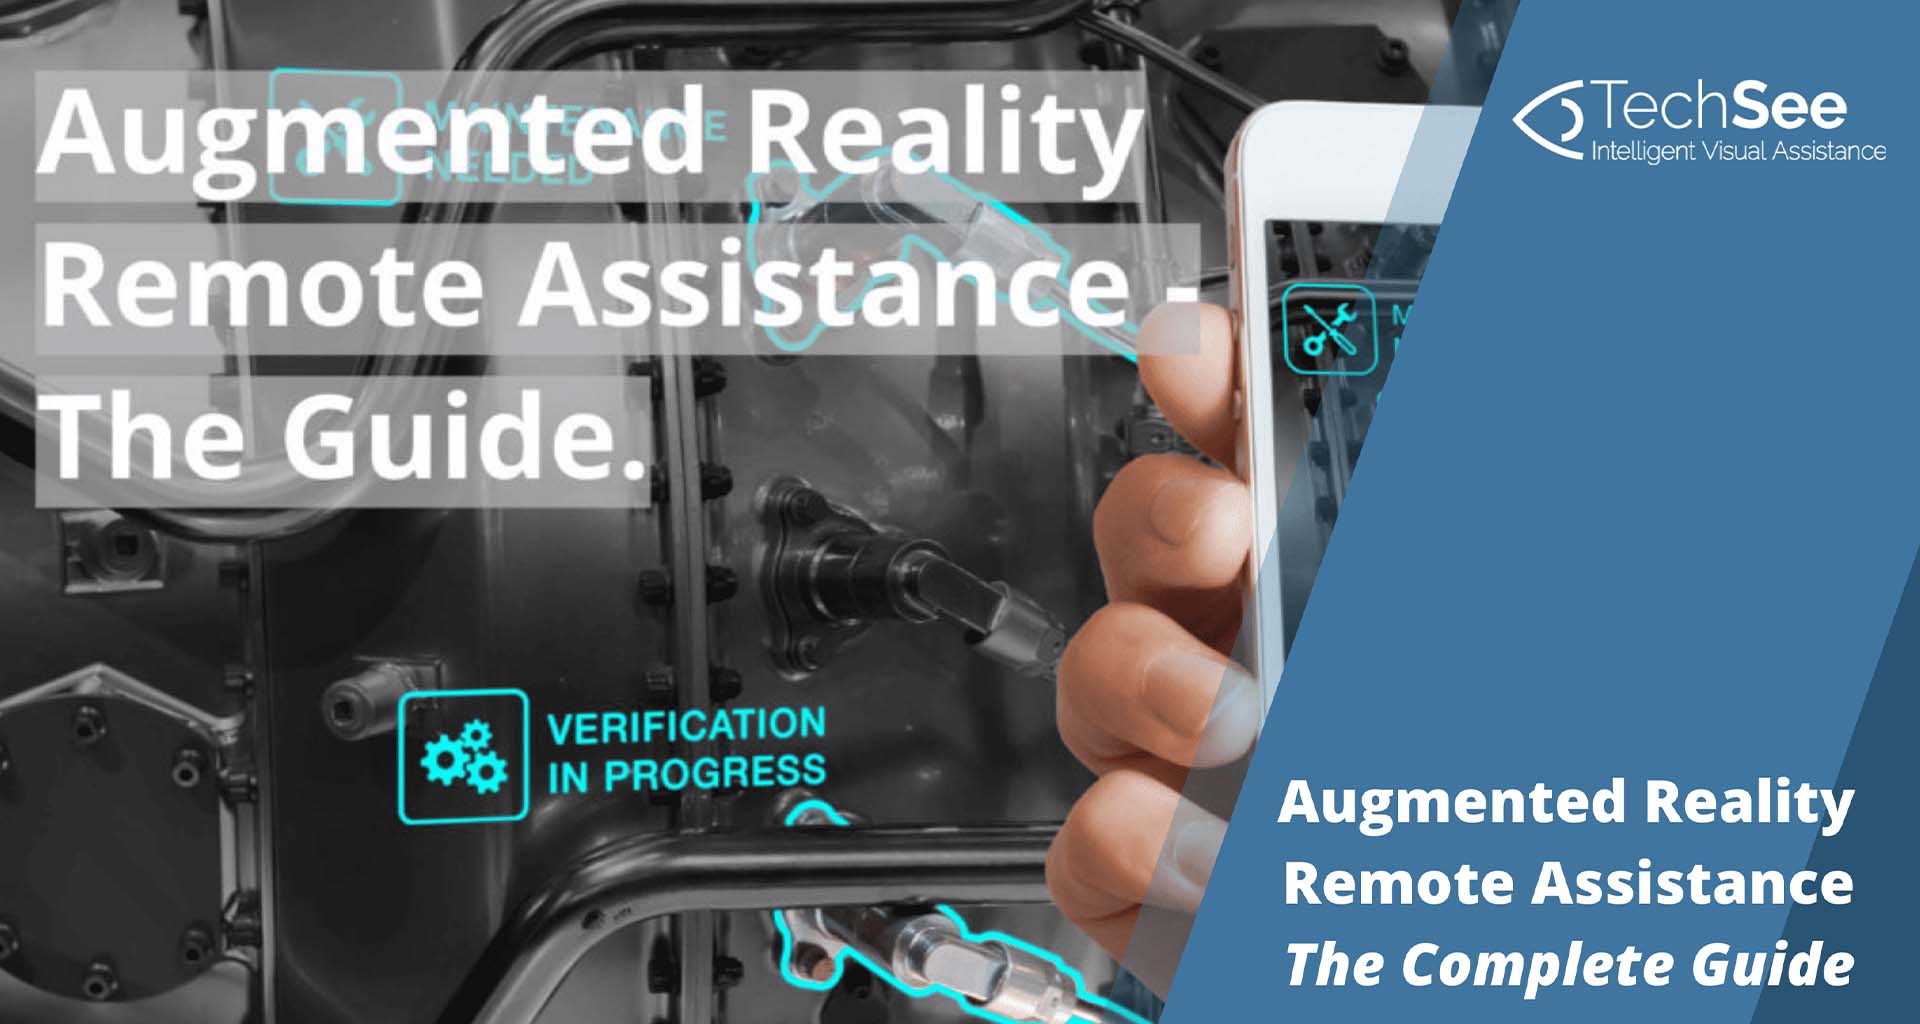 Augmented Reality (AR) Remote Assistance: Definition, Applications & Benefits